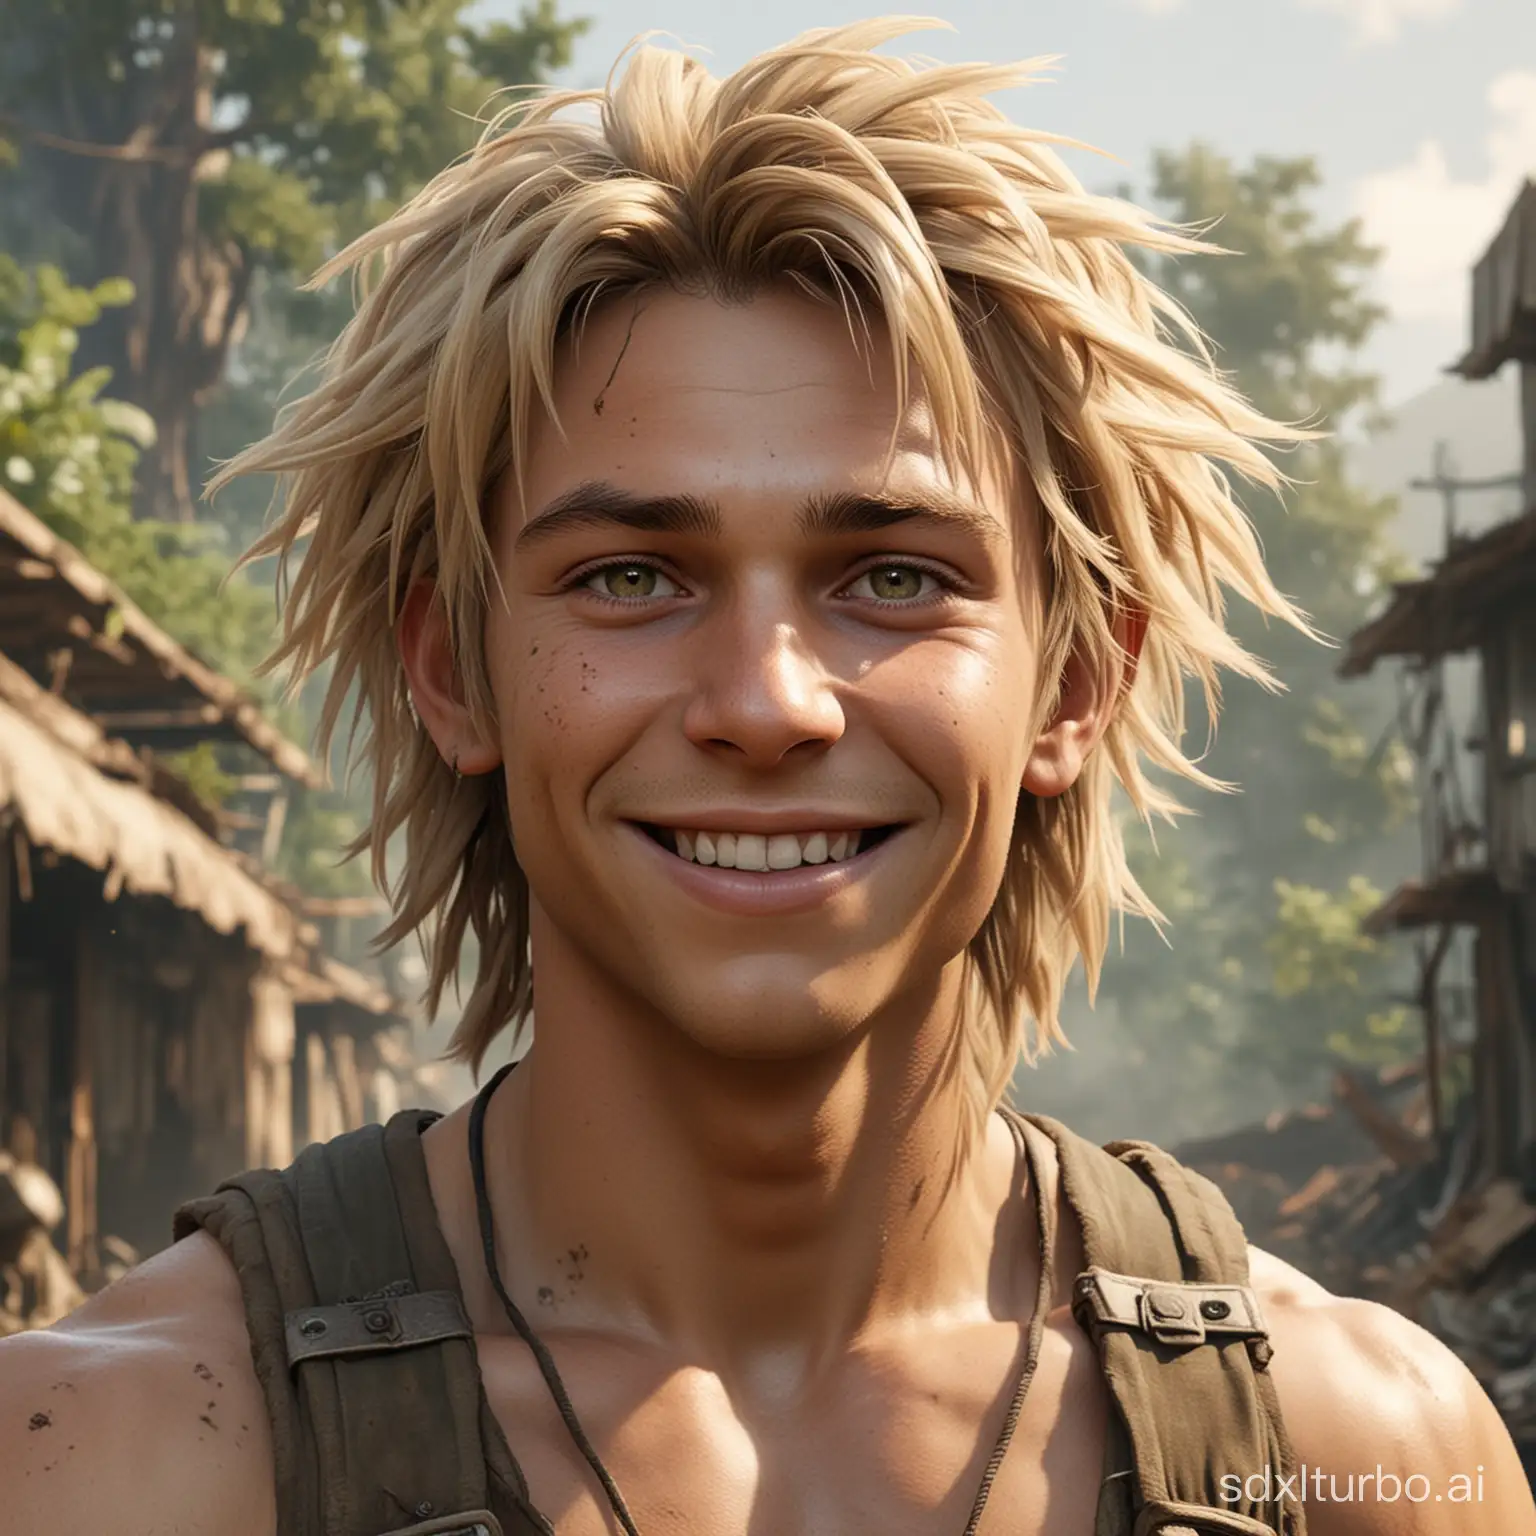 video game character, happy proud Tarzan-like boy living in the post-apocalypse with unkempt blonde hair